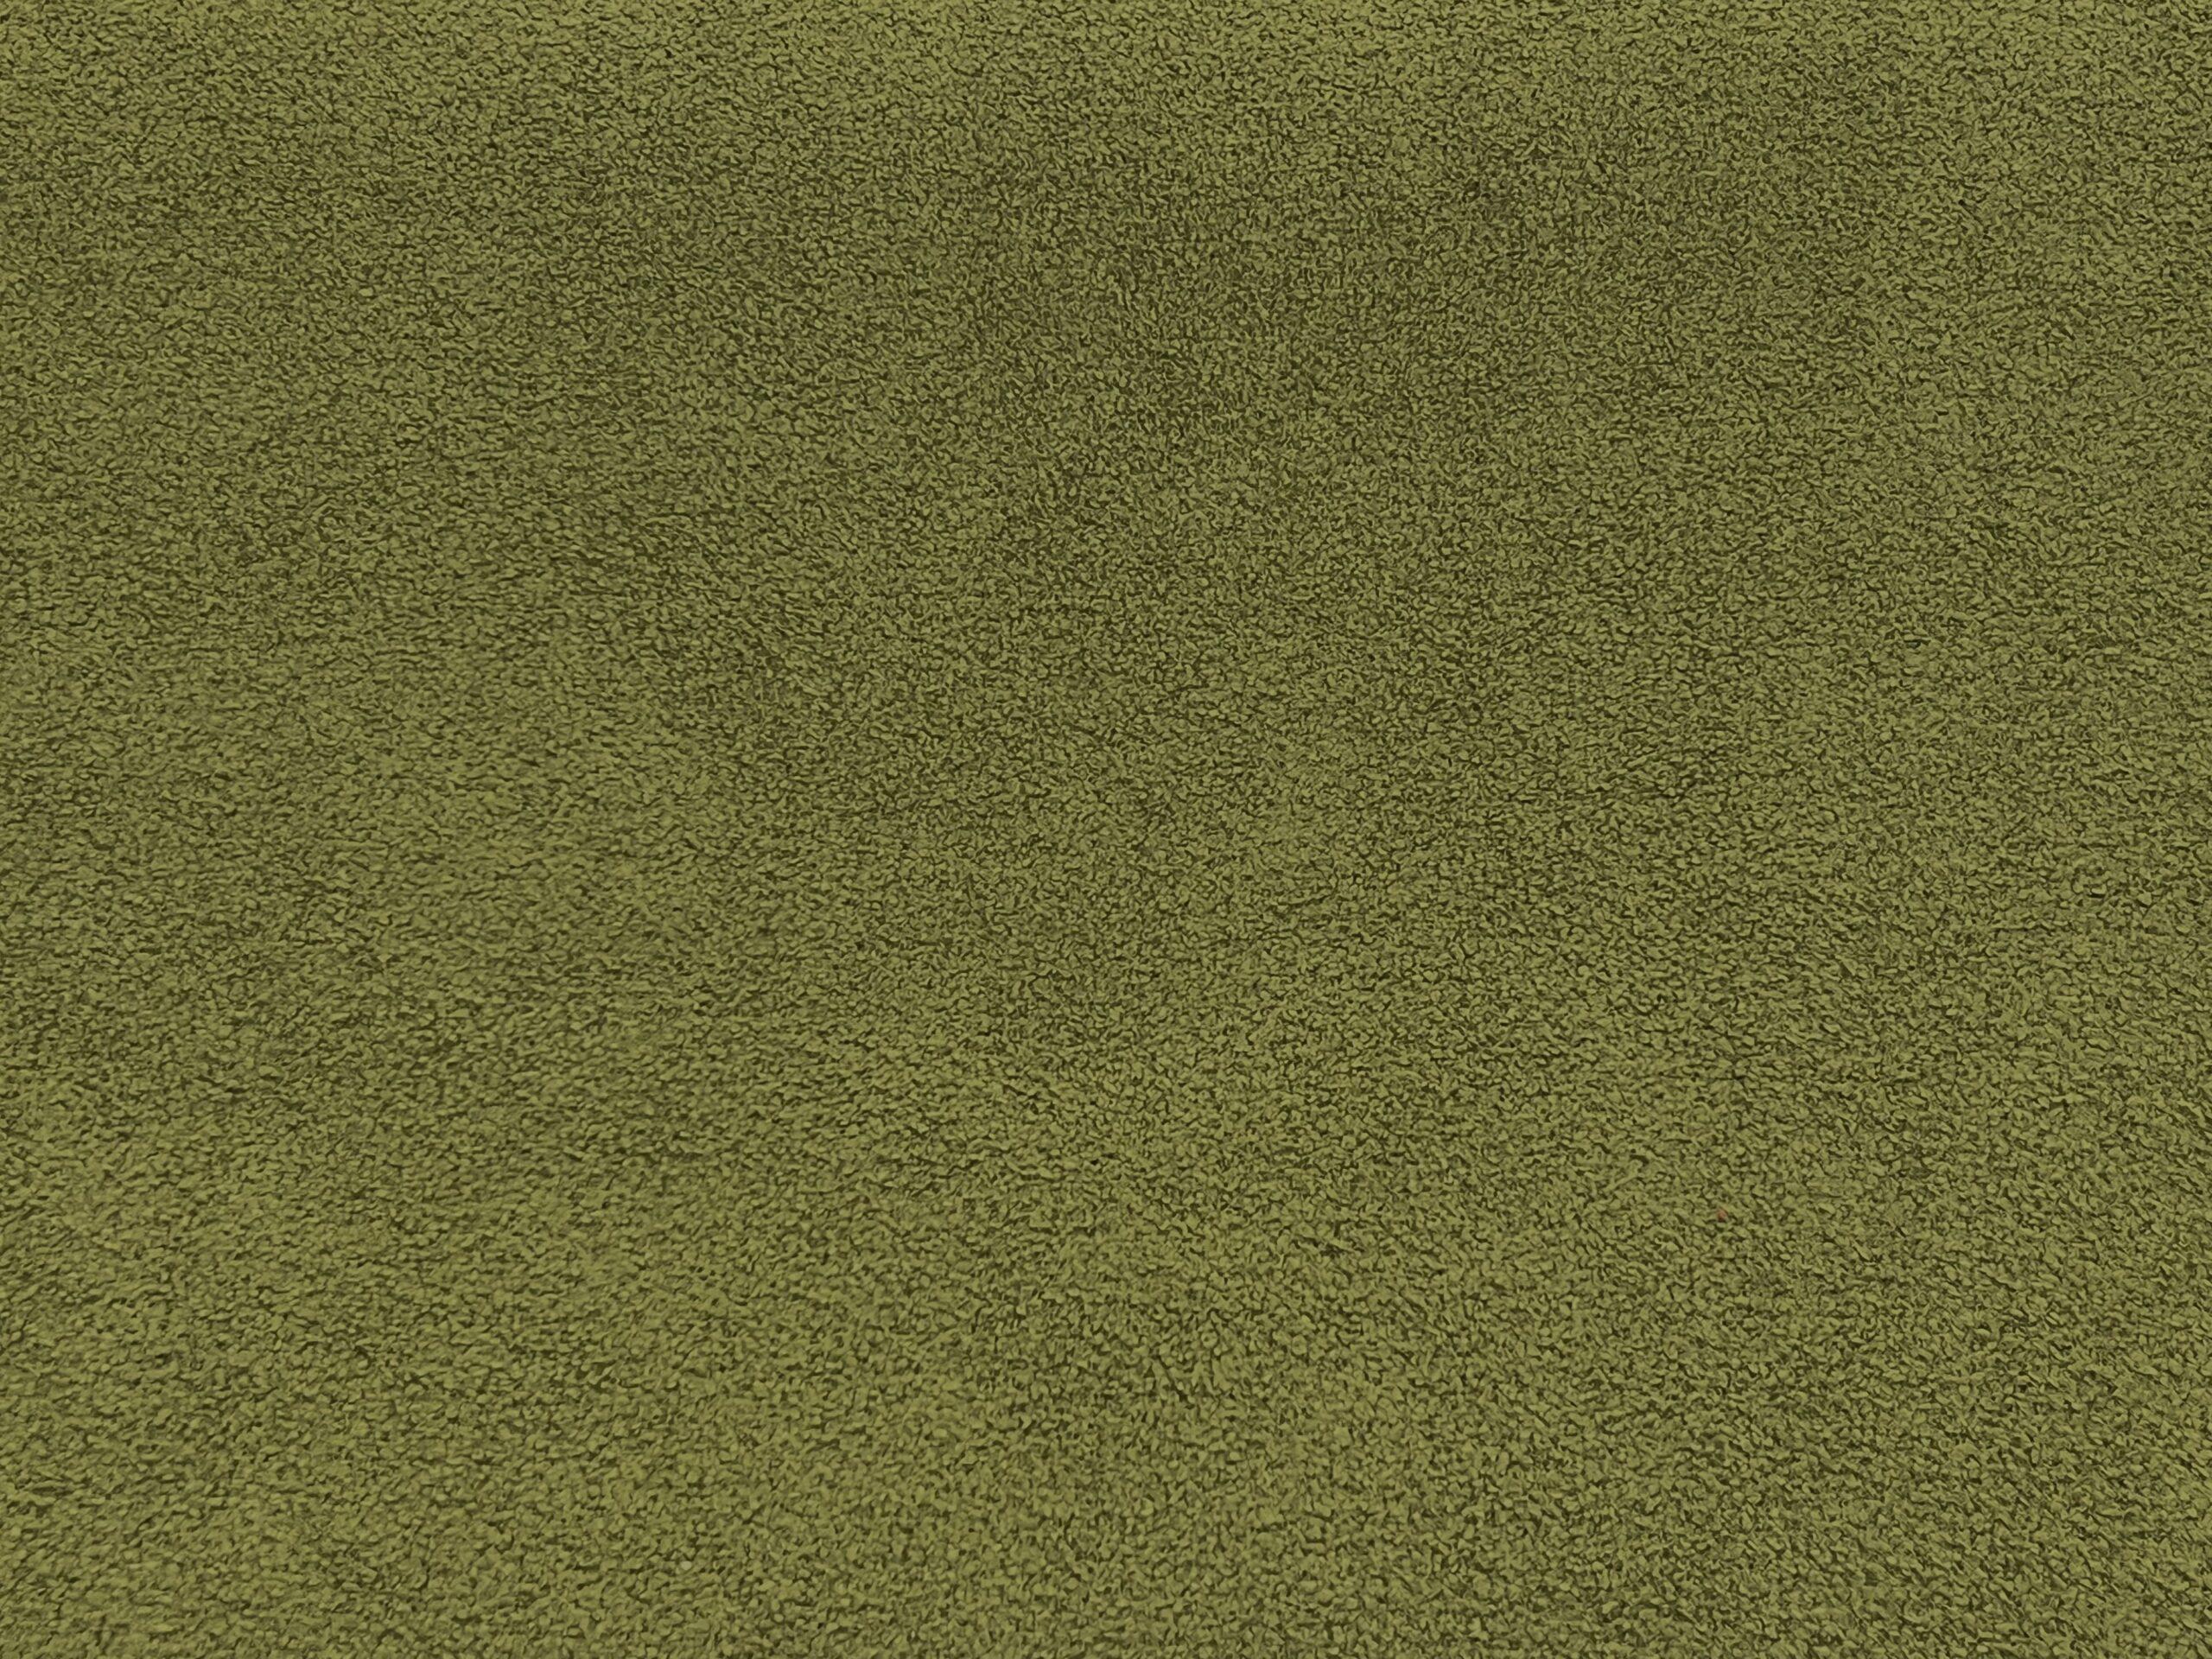 Greendale Home Fashions Hyatt Moss Solid Stain Resistant